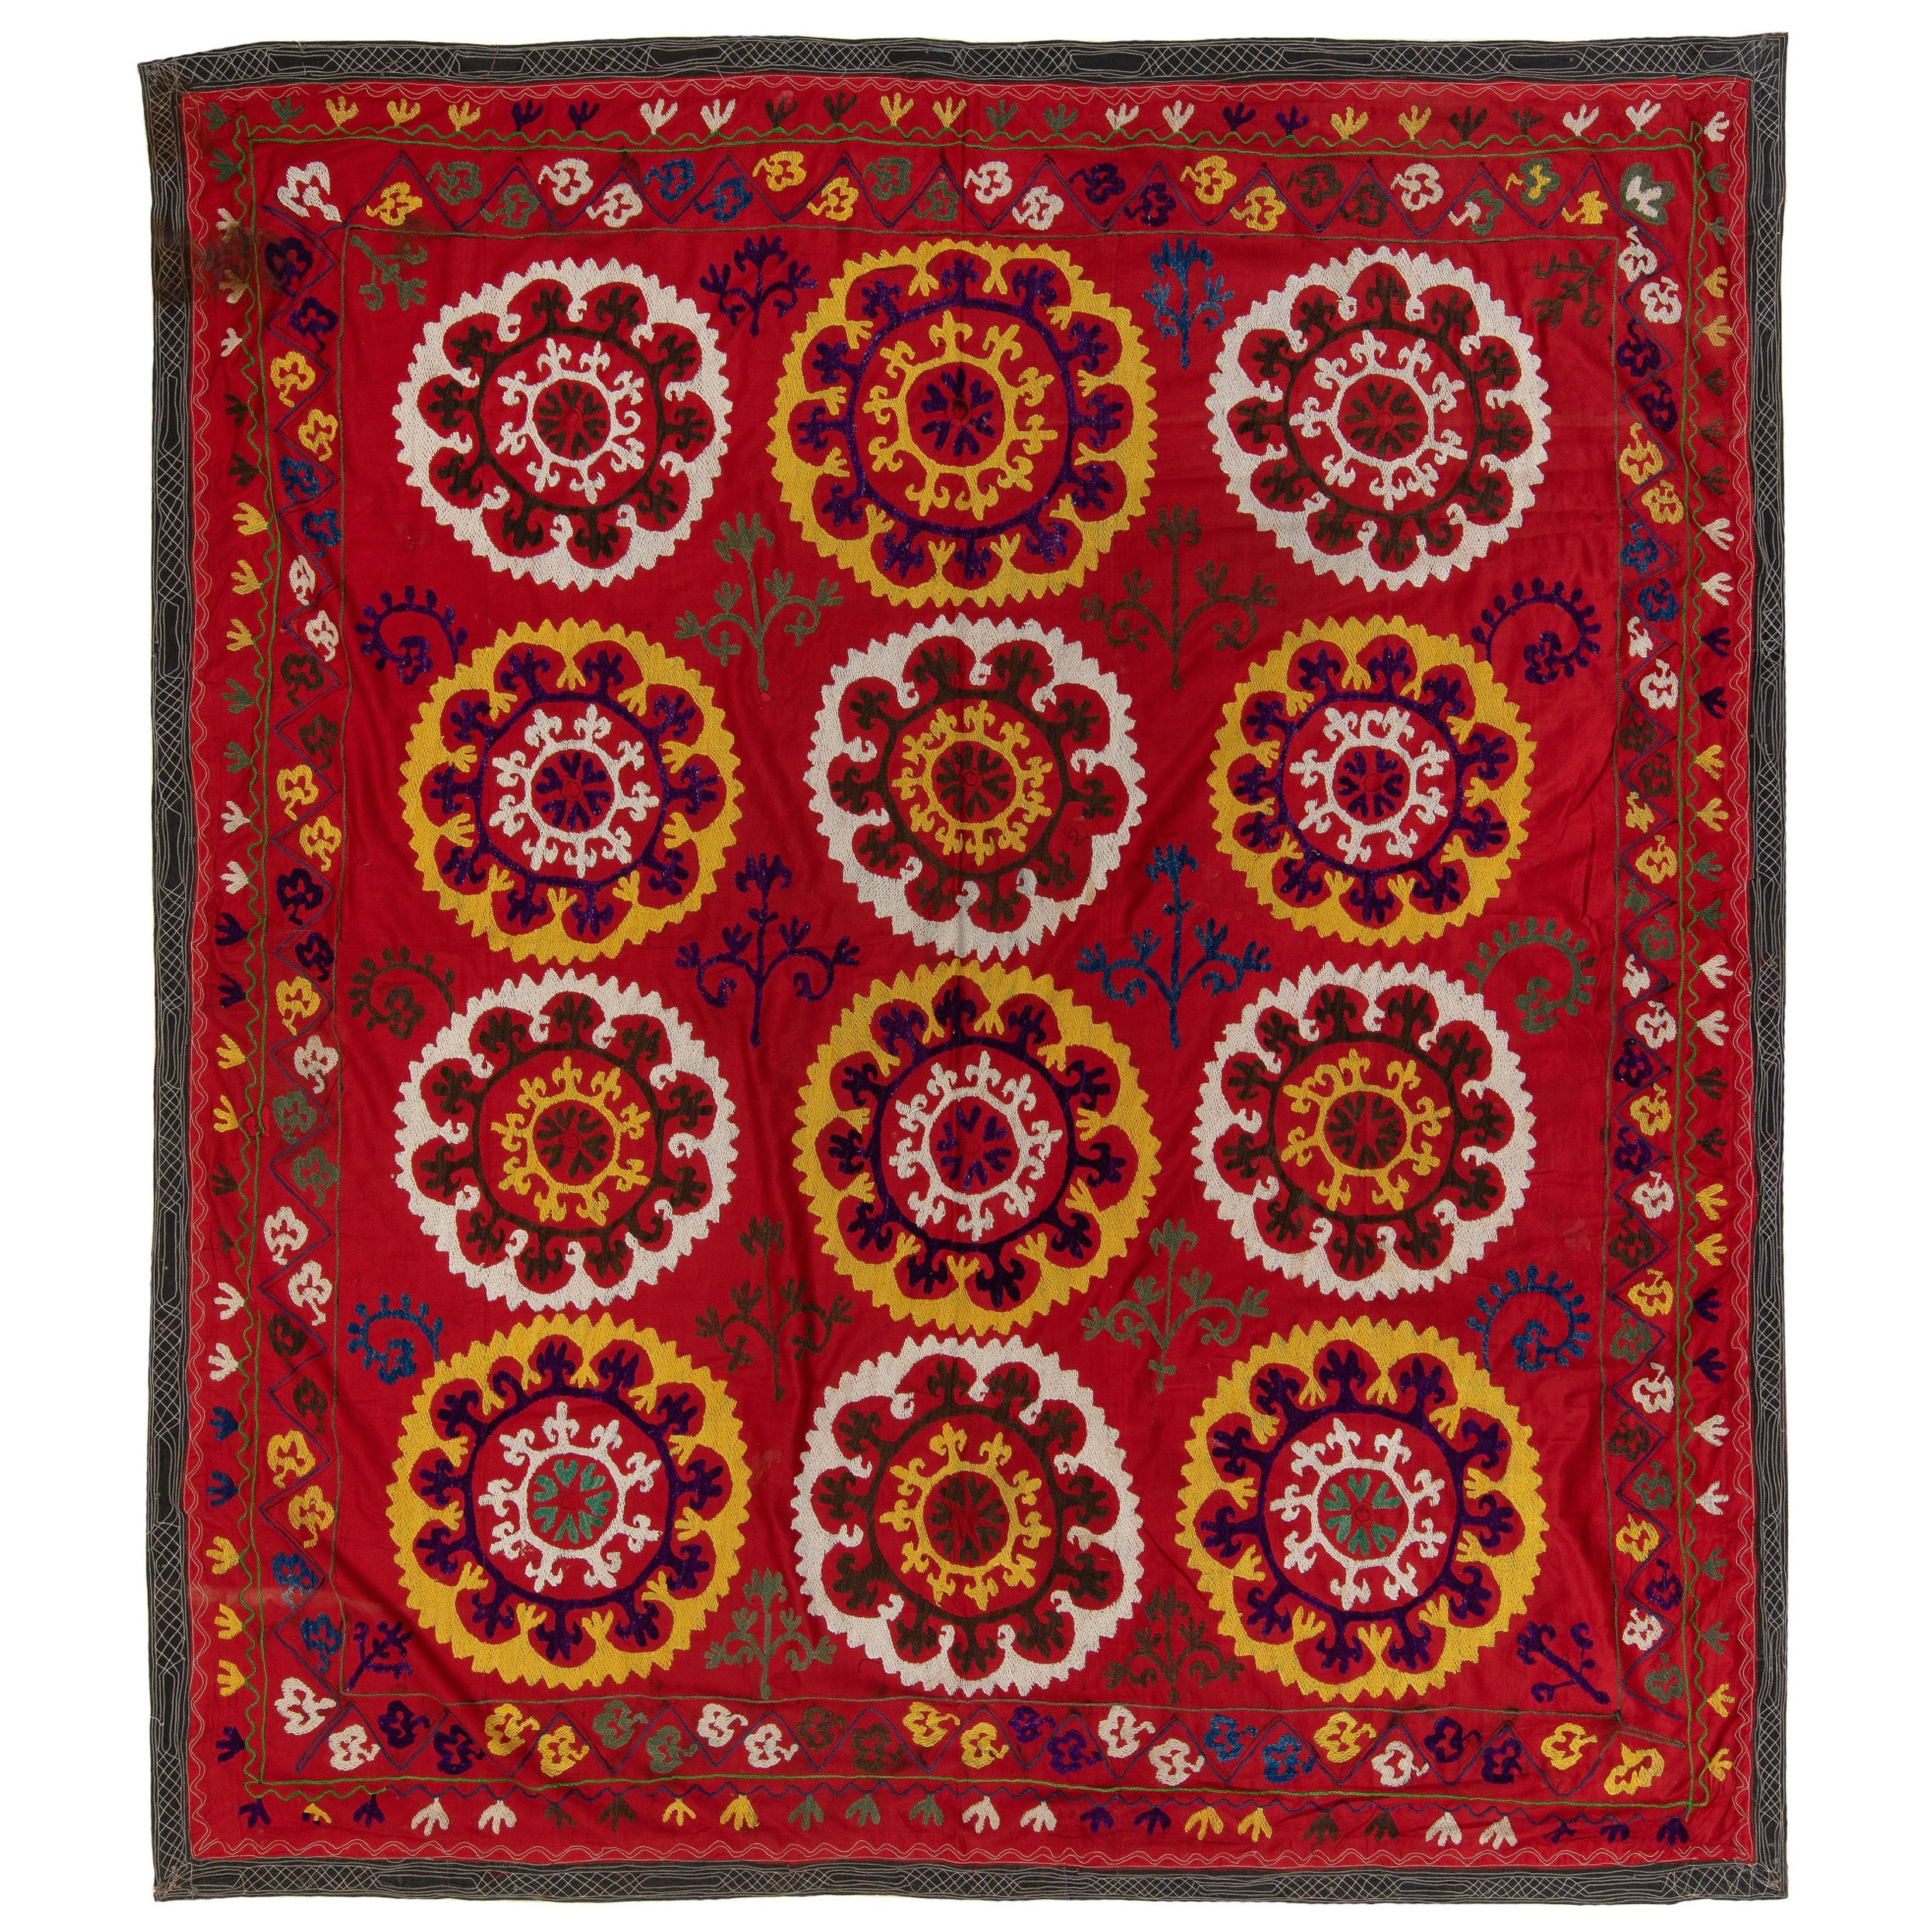 5.8x6.5 Ft Vintage Bedspread, Red Throw, Silk Wall Hanging, Embroidered Tapestry For Sale